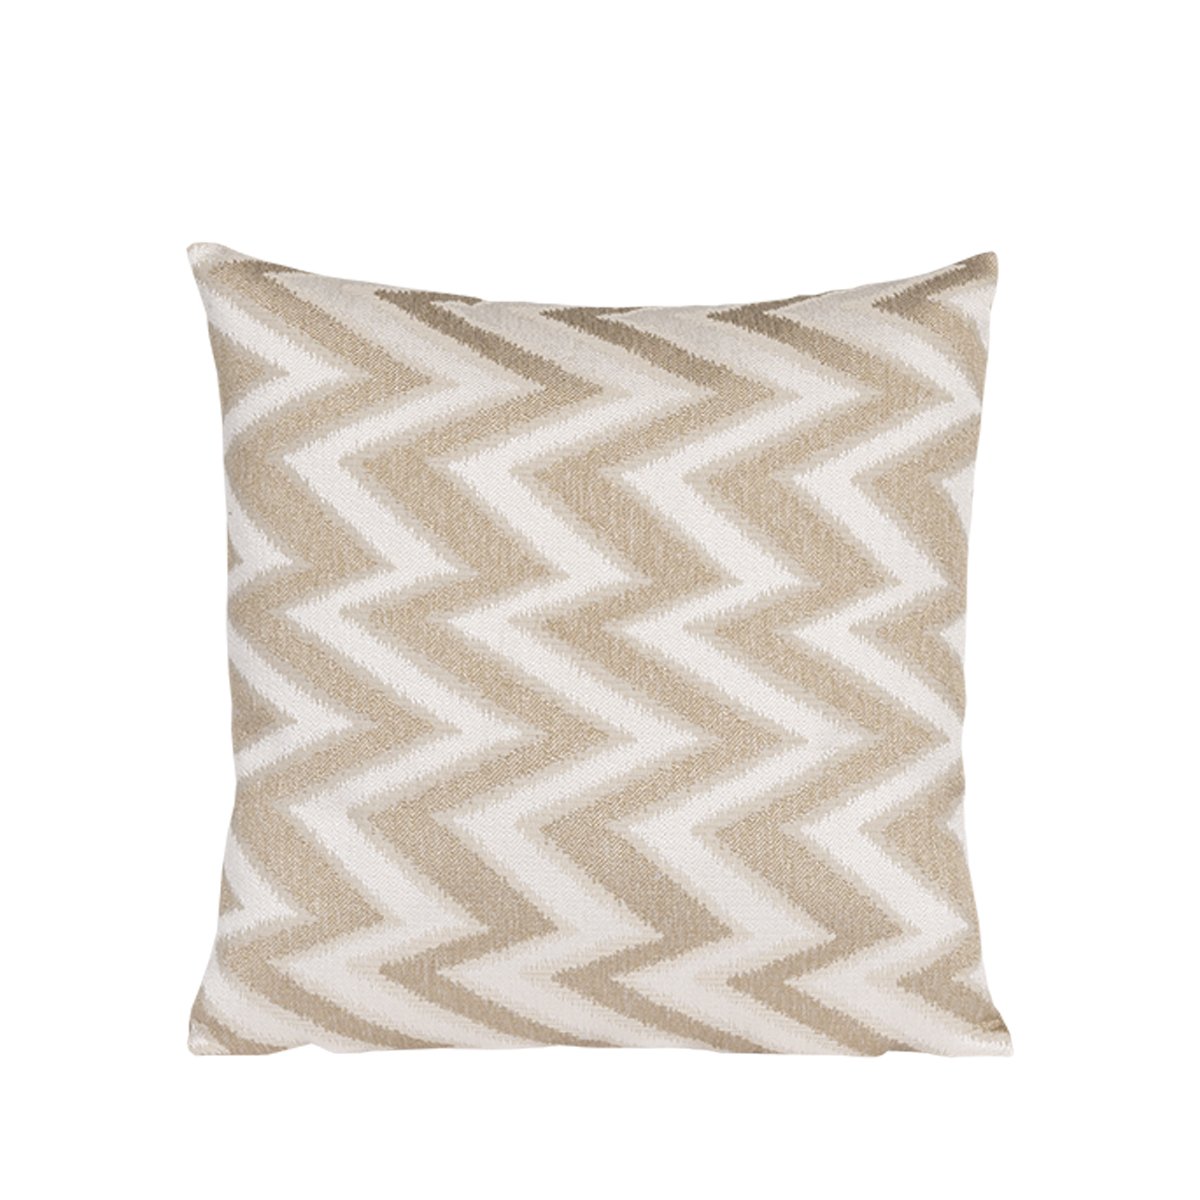 Pillow Concealed Stitched 45x45 Beige Patterned